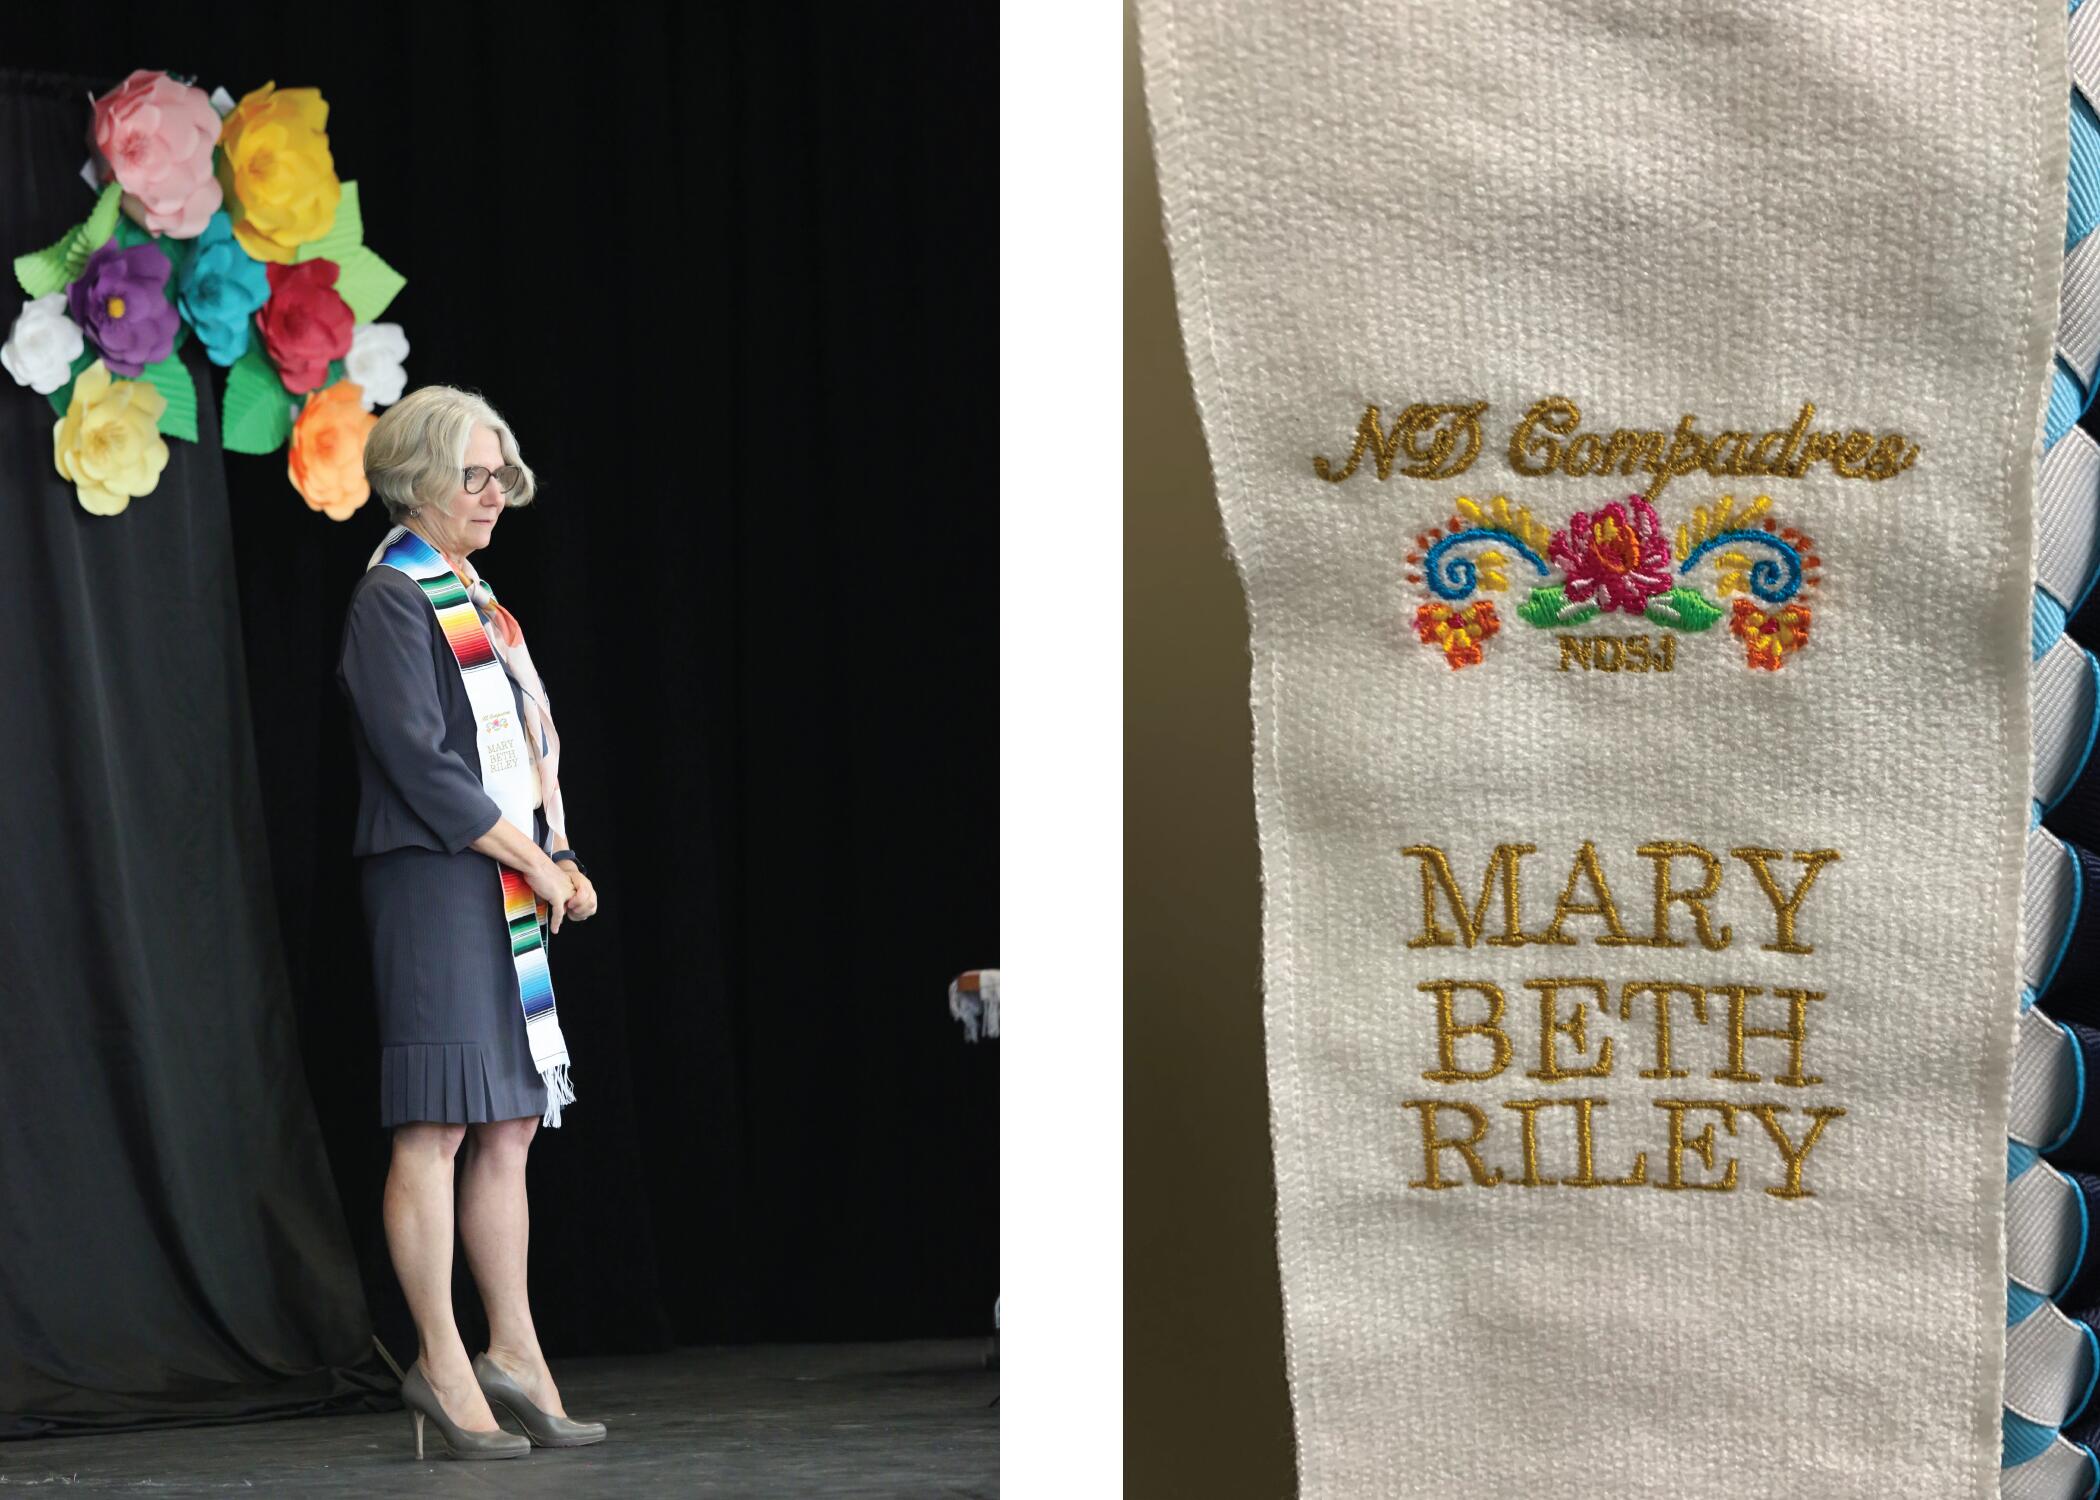 Mary Beth Riley wearing a personalized cultural stole